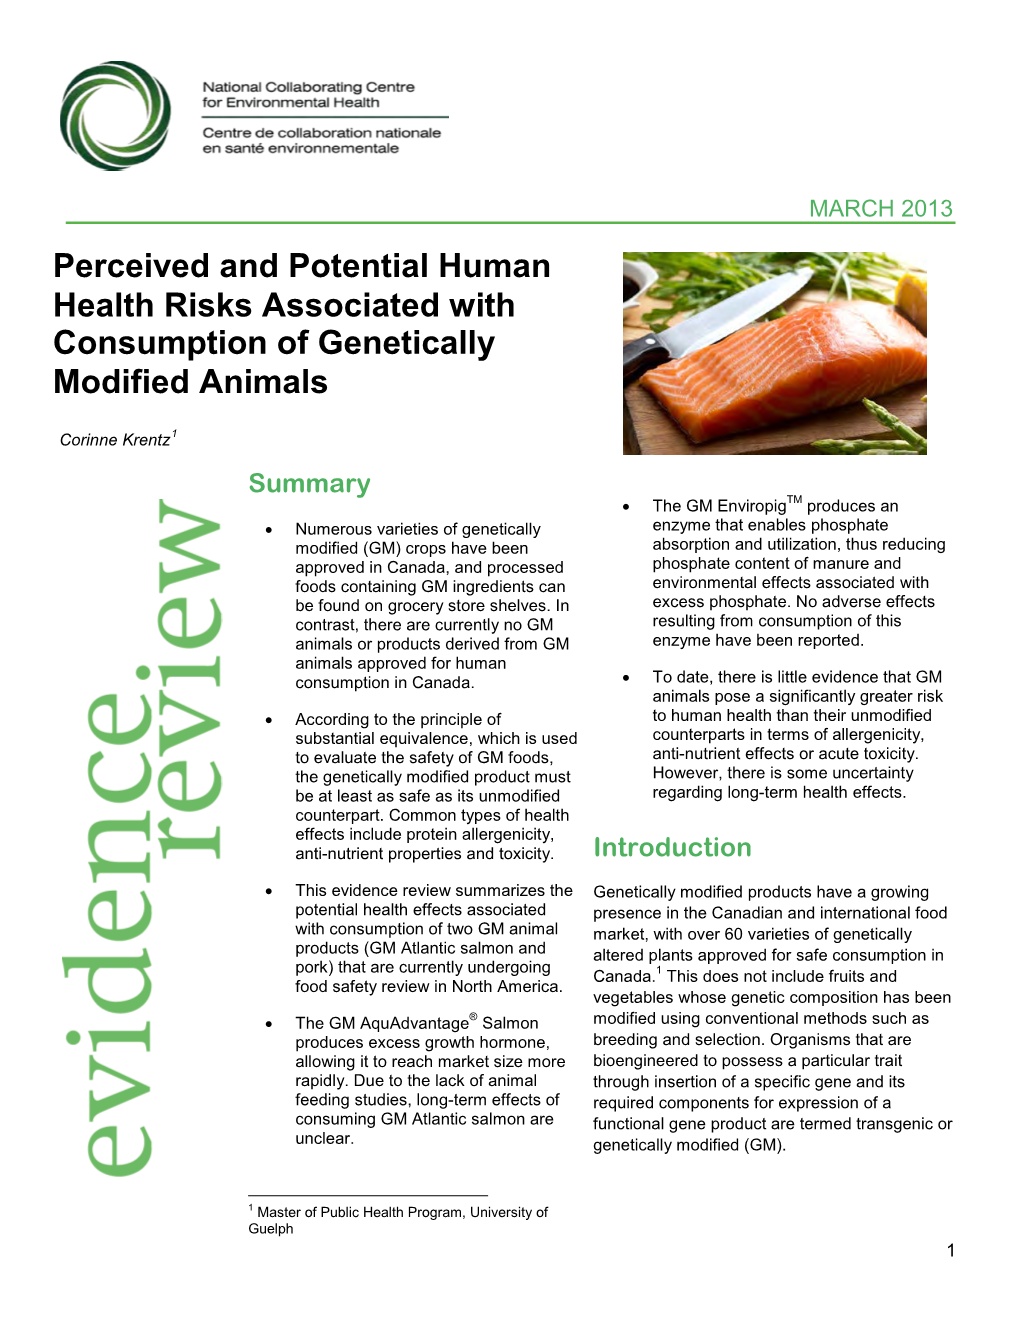 Perceived and Potential Human Health Risks Associated with Consumption of Genetically Modified Animals